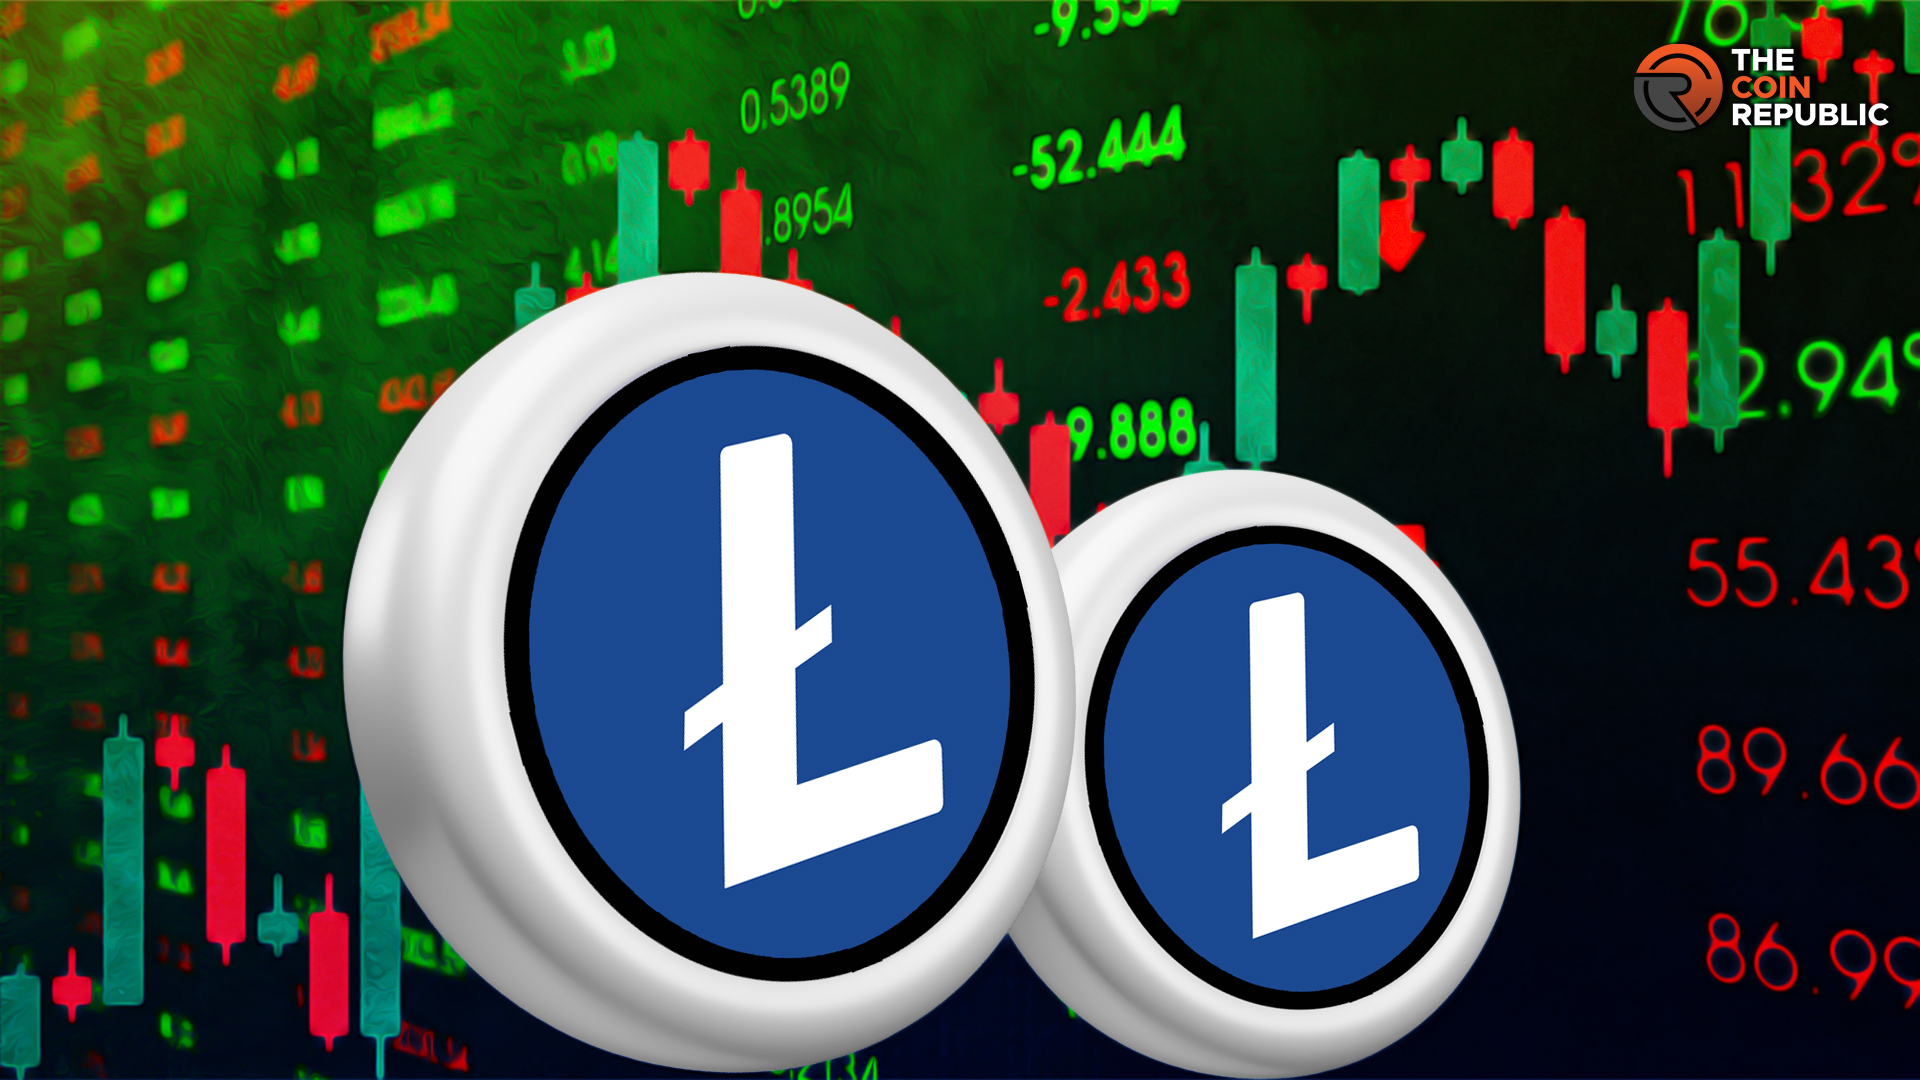 Litecoin Price Prediction: Enters Recovery Mode; Next Target $80?